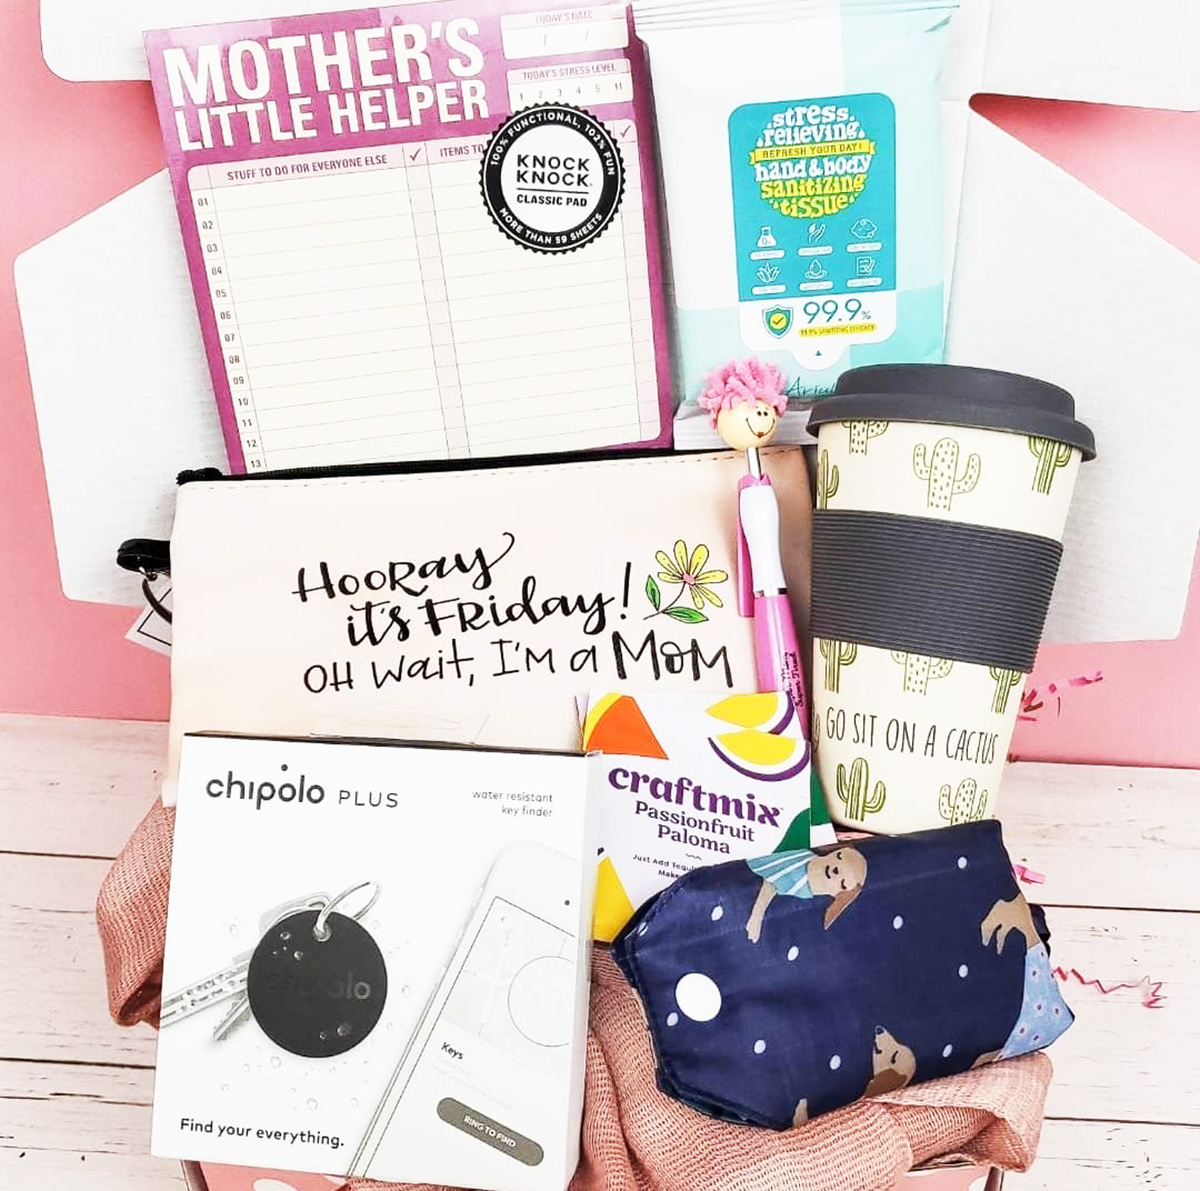 14 Of The Best Mother’s Day Gifts For Friends To Make Them Smile